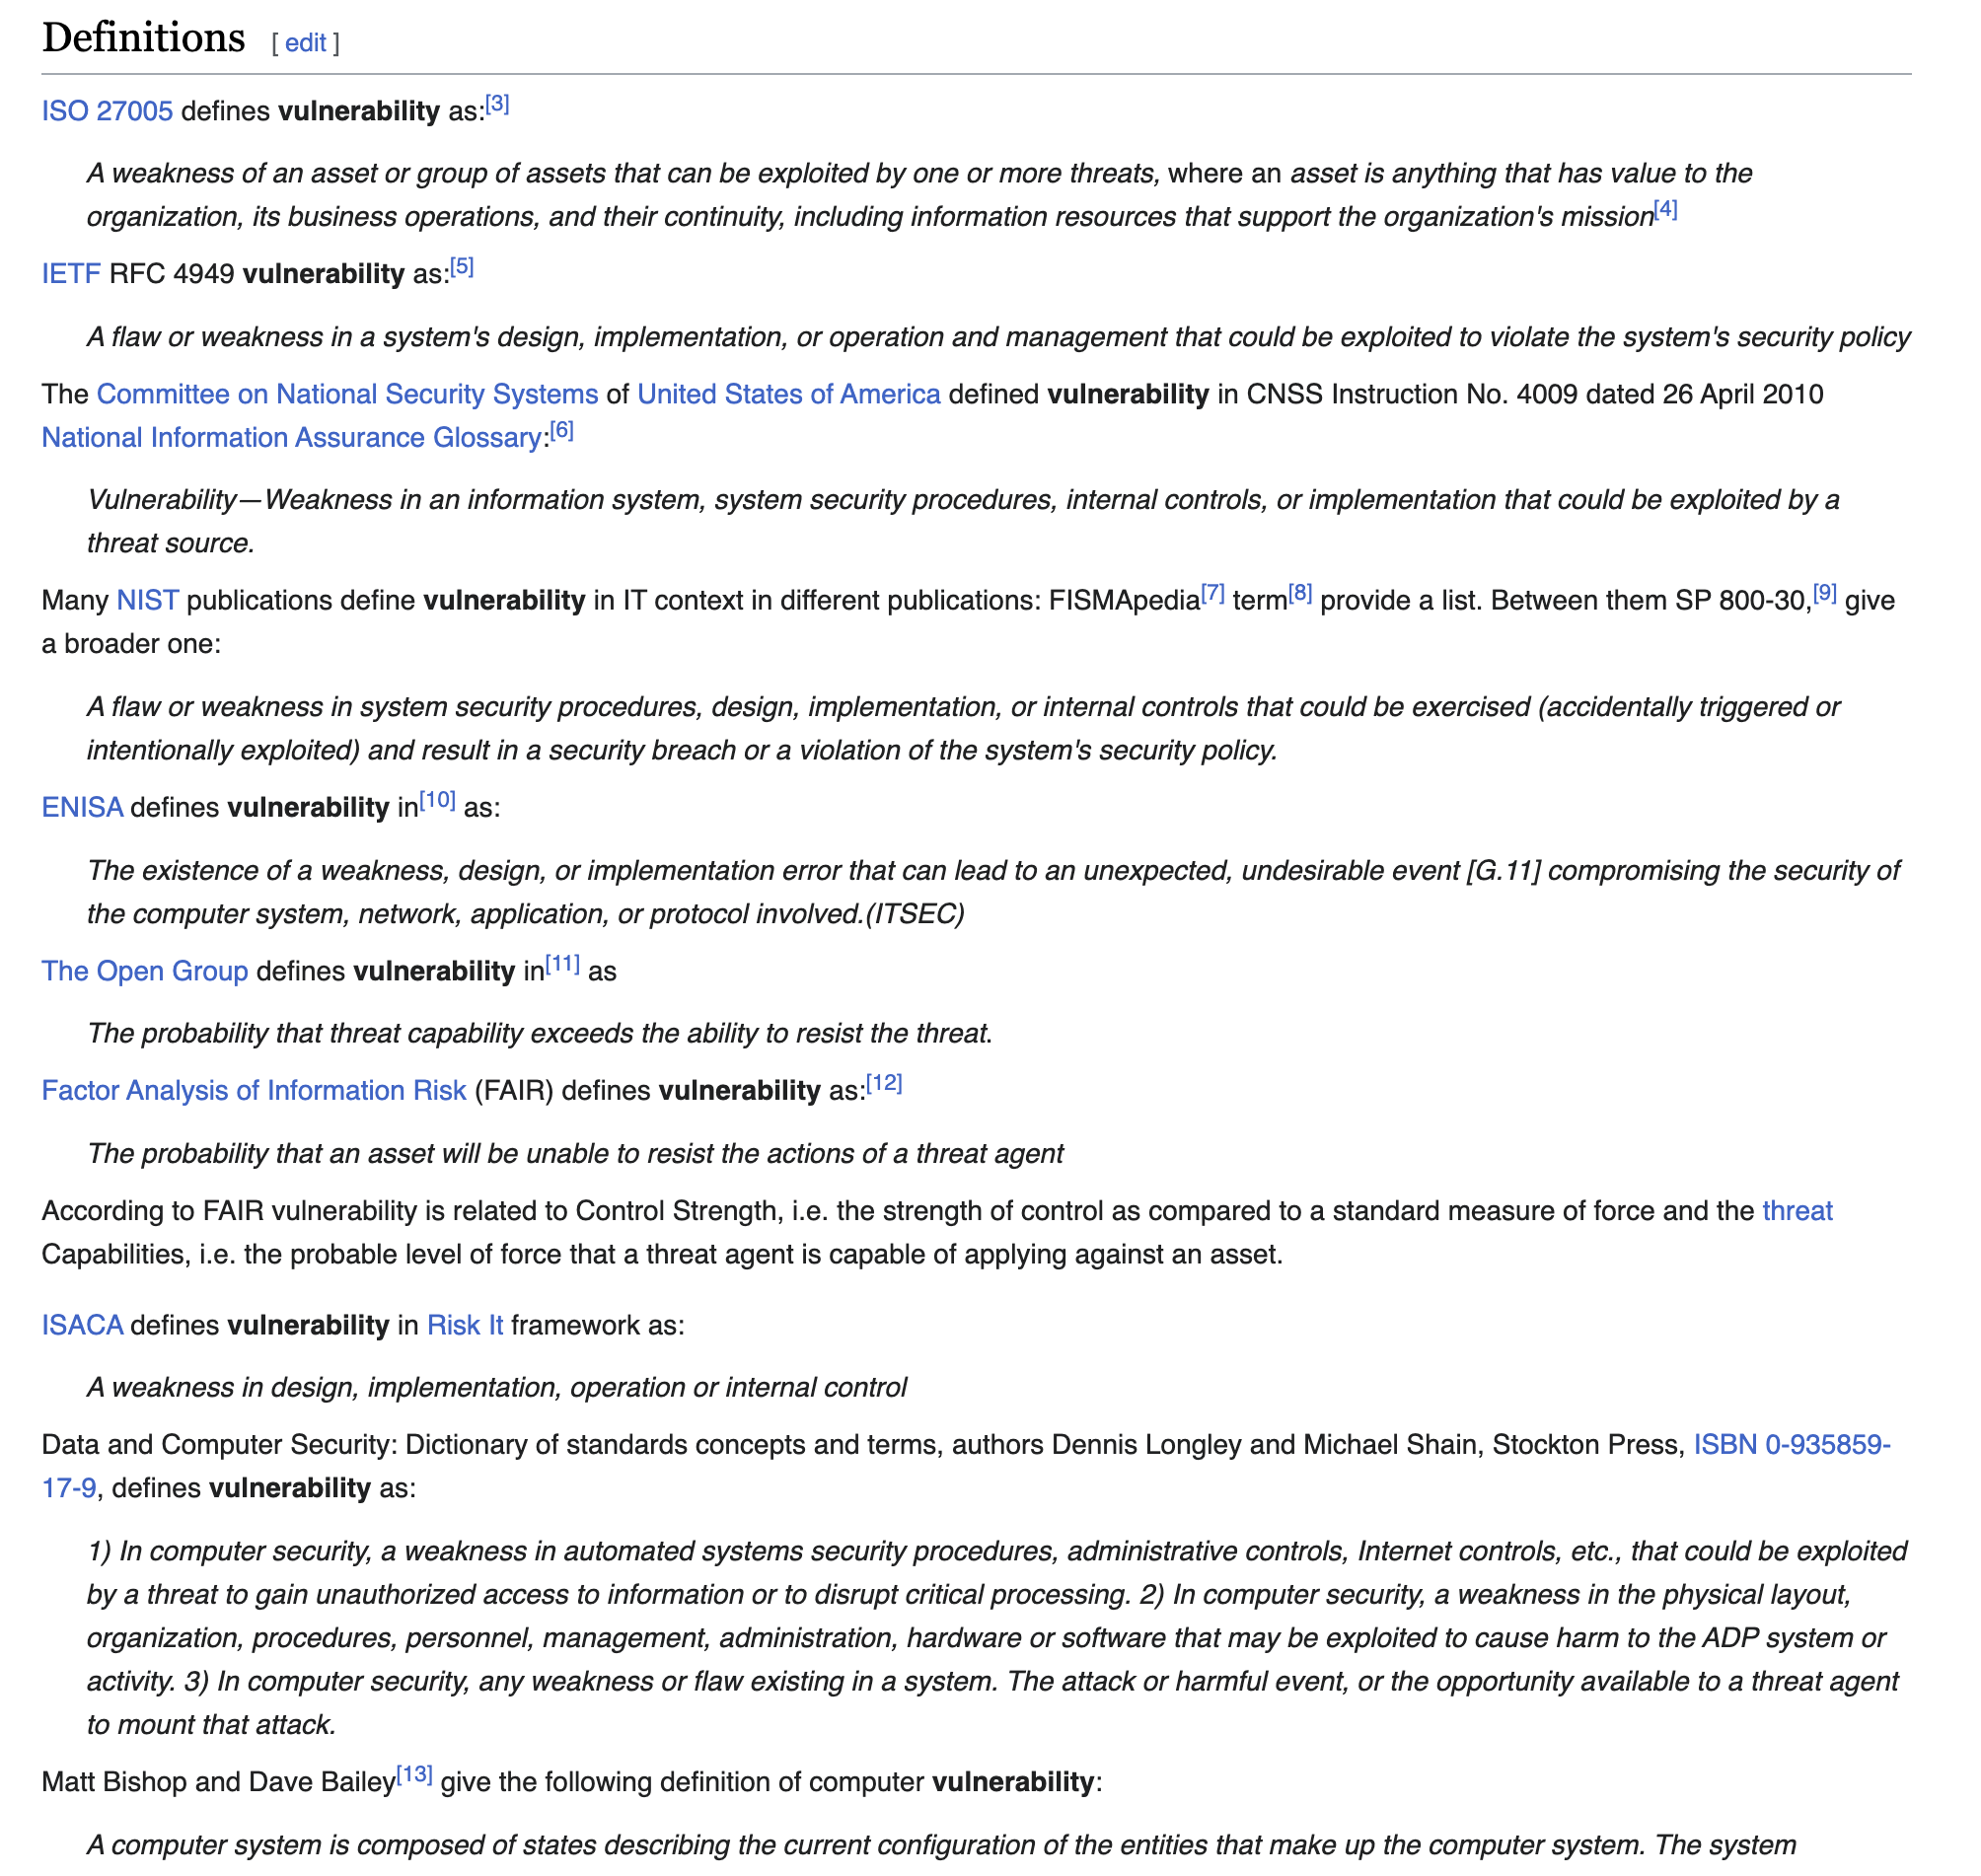 A screenshot of the wikipedia page listing different definitions of "vulnerability" in the computing sense.